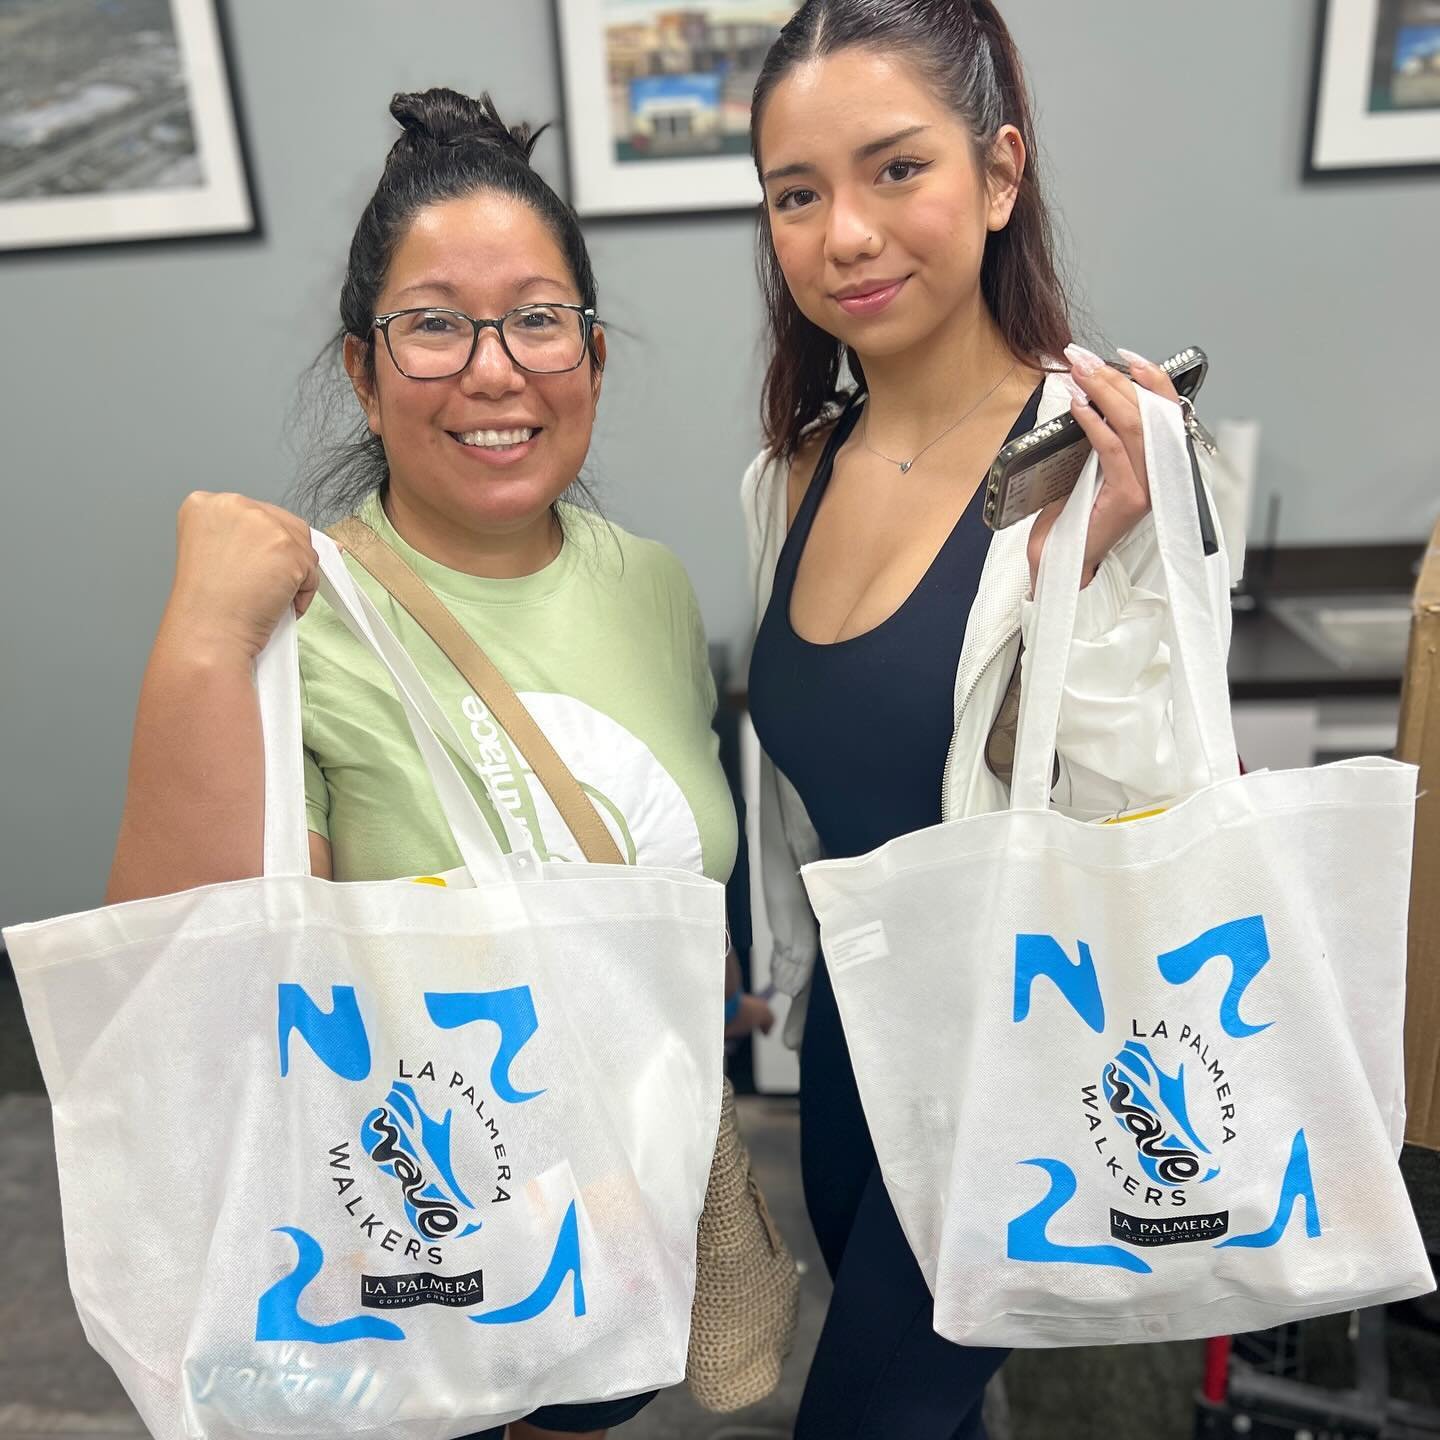 Good luck to Team Wave Walkers tomorrow at @beachtobayrelay 🌊🏃🏽&zwj;♀️! La Palmera is excited to have THREE teams participate this year. And thank you to all the La Palmera stores and restaurants for the swag! #wavewalkers #teamwavewalkers 

@lush